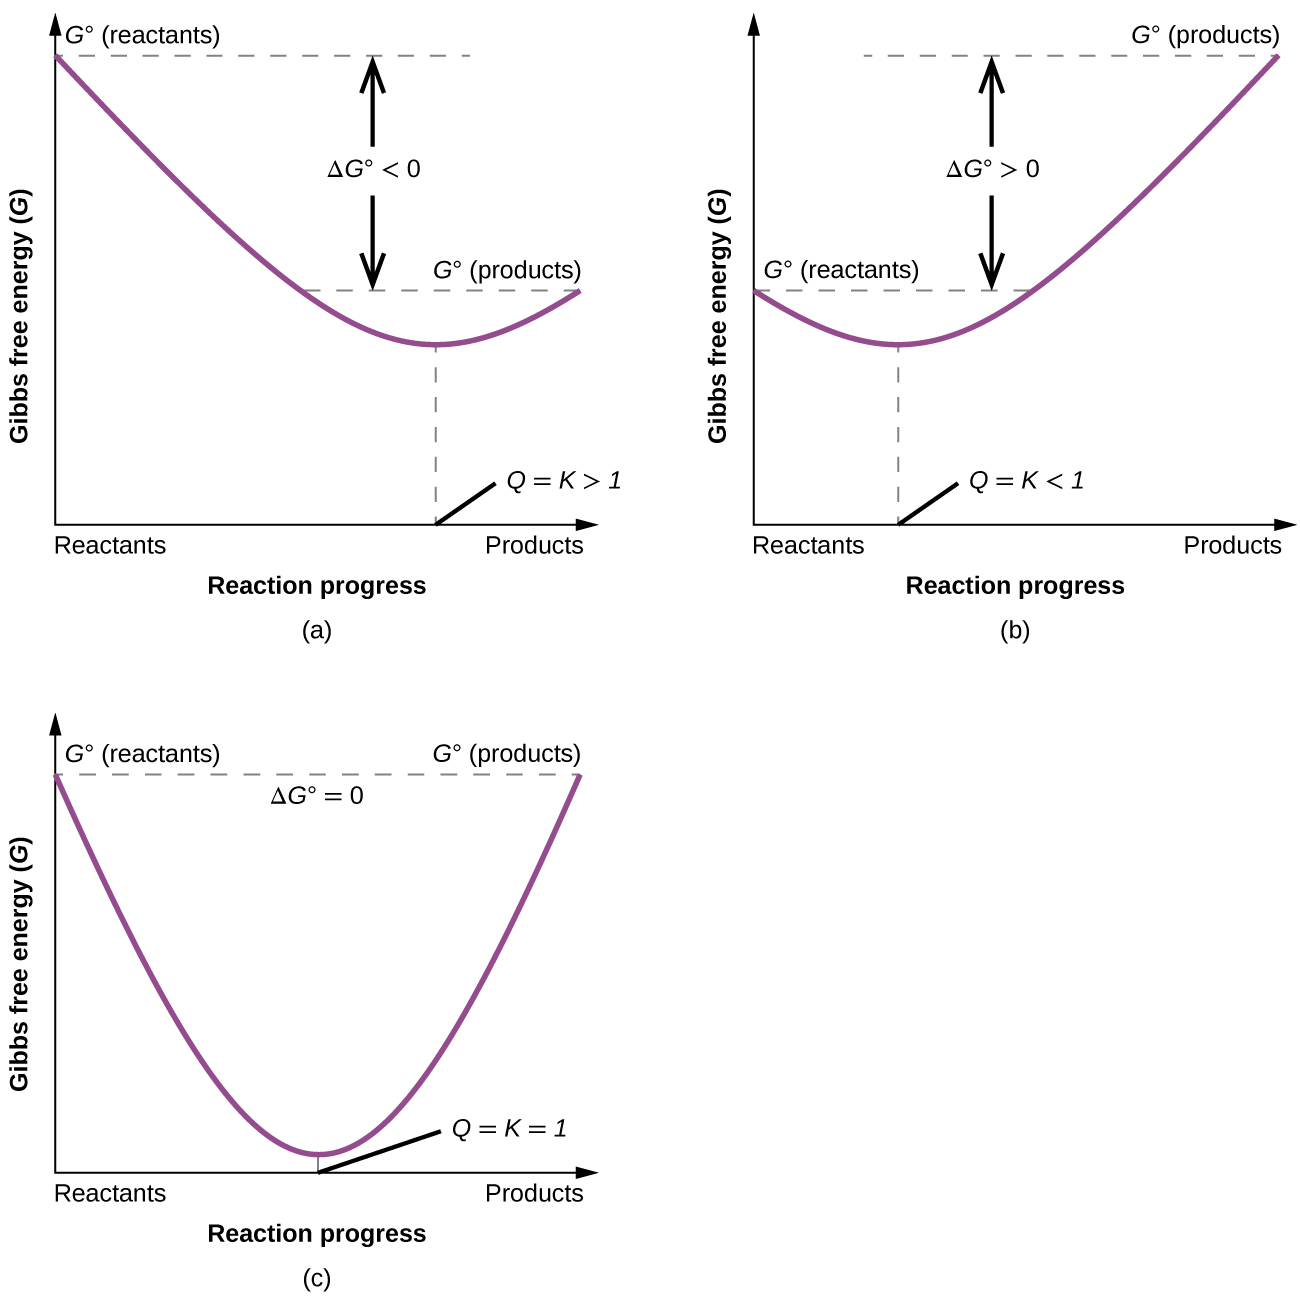 Three graphs, labeled, “a,” “b,” and “c” are shown where the y-axis is labeled, “Gibbs free energy ( G ),” and, “G superscript degree sign ( reactants ),” while the x-axis is labeled, “Reaction progress,” and “Reactants,” on the left and, “Products,” on the right. In graph a, a line begins at the upper left side and goes steadily down to a point about halfway up the y-axis and two thirds of the way on the x-axis, then rises again to a point labeled, “G superscript degree sign ( products ),” that is slightly higher than halfway up the y-axis. The distance between the beginning and ending points of the graph is labeled as, “delta G less than 0,” while the lowest point on the graph is labeled, “Q equals K greater than 1.” In graph b, a line begins at the middle left side and goes steadily down to a point about two fifths up the y-axis and one third of the way on the x-axis, then rises again to a point labeled, “G superscript degree sign ( products ),” that is near the top of the y-axis. The distance between the beginning and ending points of the graph is labeled as, “delta G greater than 0,” while the lowest point on the graph is labeled, “Q equals K less than 1.” In graph c, a line begins at the upper left side and goes steadily down to a point near the bottom of the y-axis and half way on the x-axis, then rises again to a point labeled, “G superscript degree sign ( products ),” that is equal to the starting point on the y-axis which is labeled, “G superscript degree sign ( reactants ).” The lowest point on the graph is labeled, “Q equals K equals 1.” At the top of the graph is the label, “Delta G superscript degree sign equals 0.”